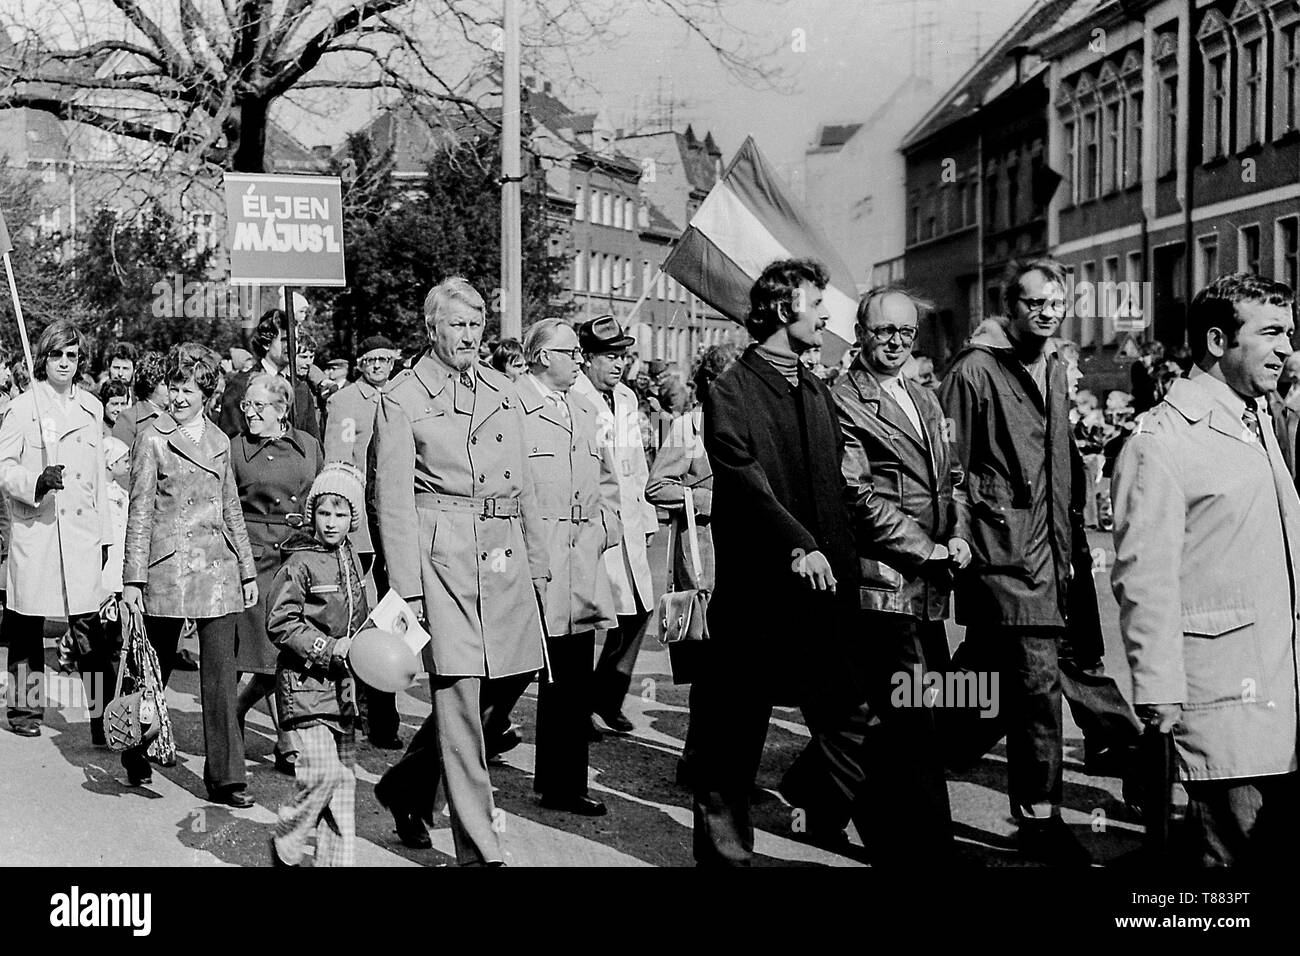 Roßlau, GDR, May 1, 1979 - A May Day demonstration march in the streets of Roßlau (Saxony-Anhalt) near the Ernst-Thälmann-Platz. Stock Photo